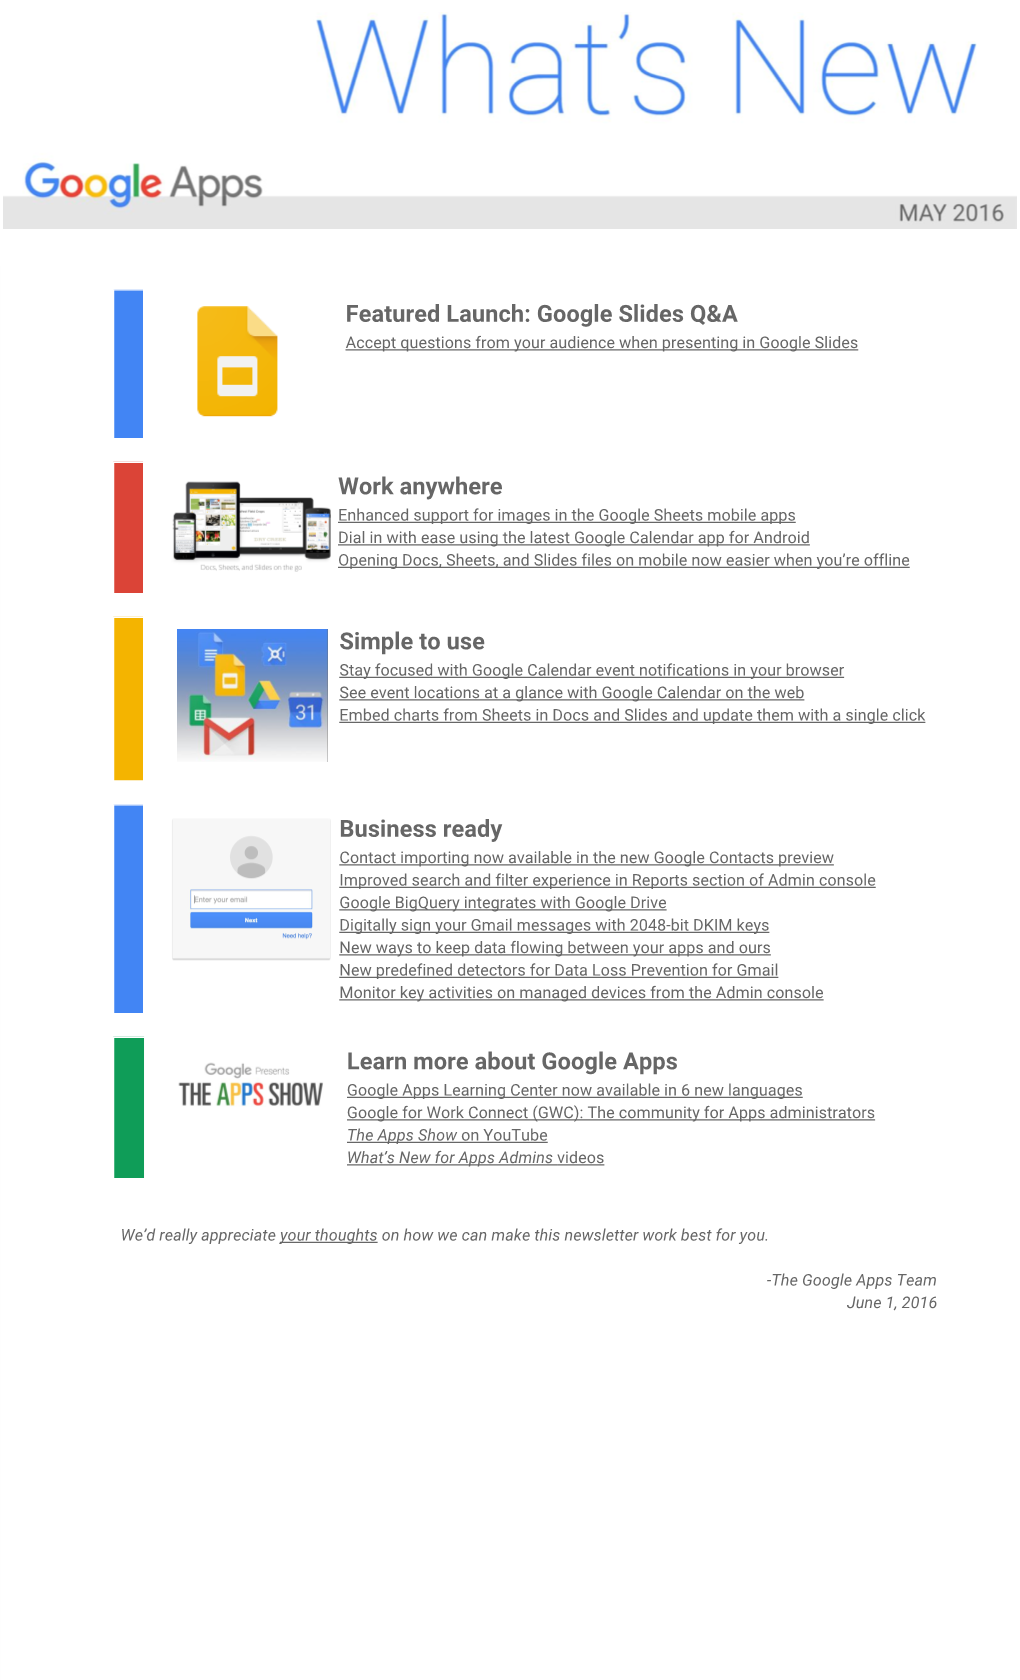 Google Slides Q&A Work Anywhere Simple to Use Business Ready